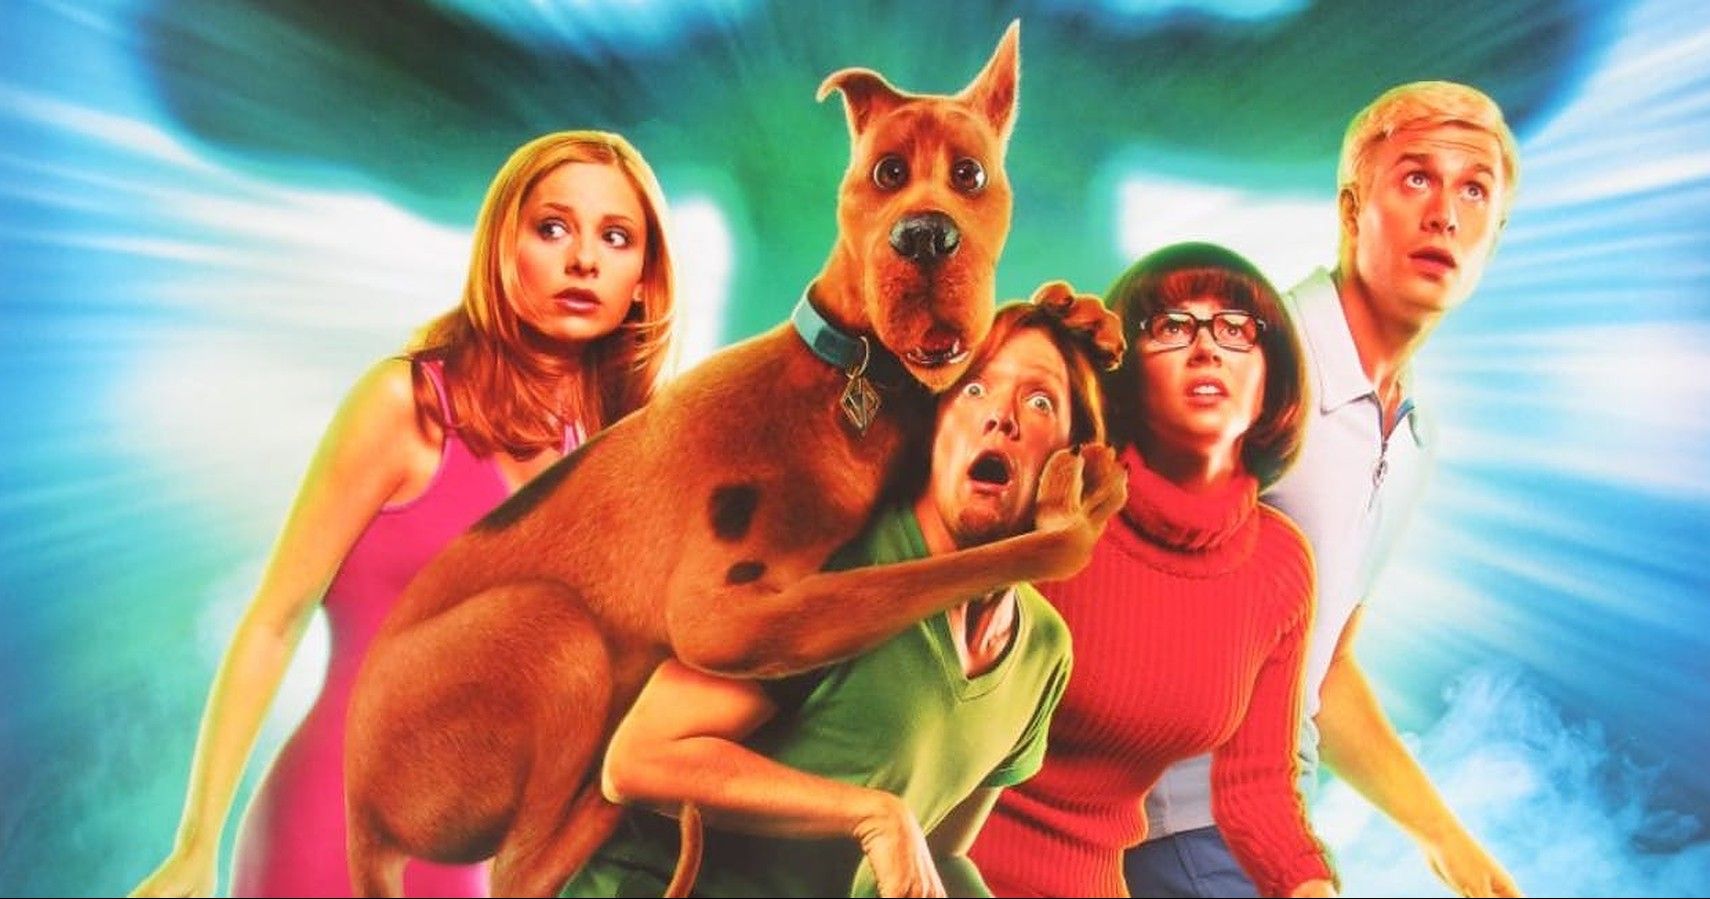 Scooby Doo Movie Live Action Where To Watch Scooby-Doo: 5 Things The Live-Action Movies Got Right (& 5 Things It